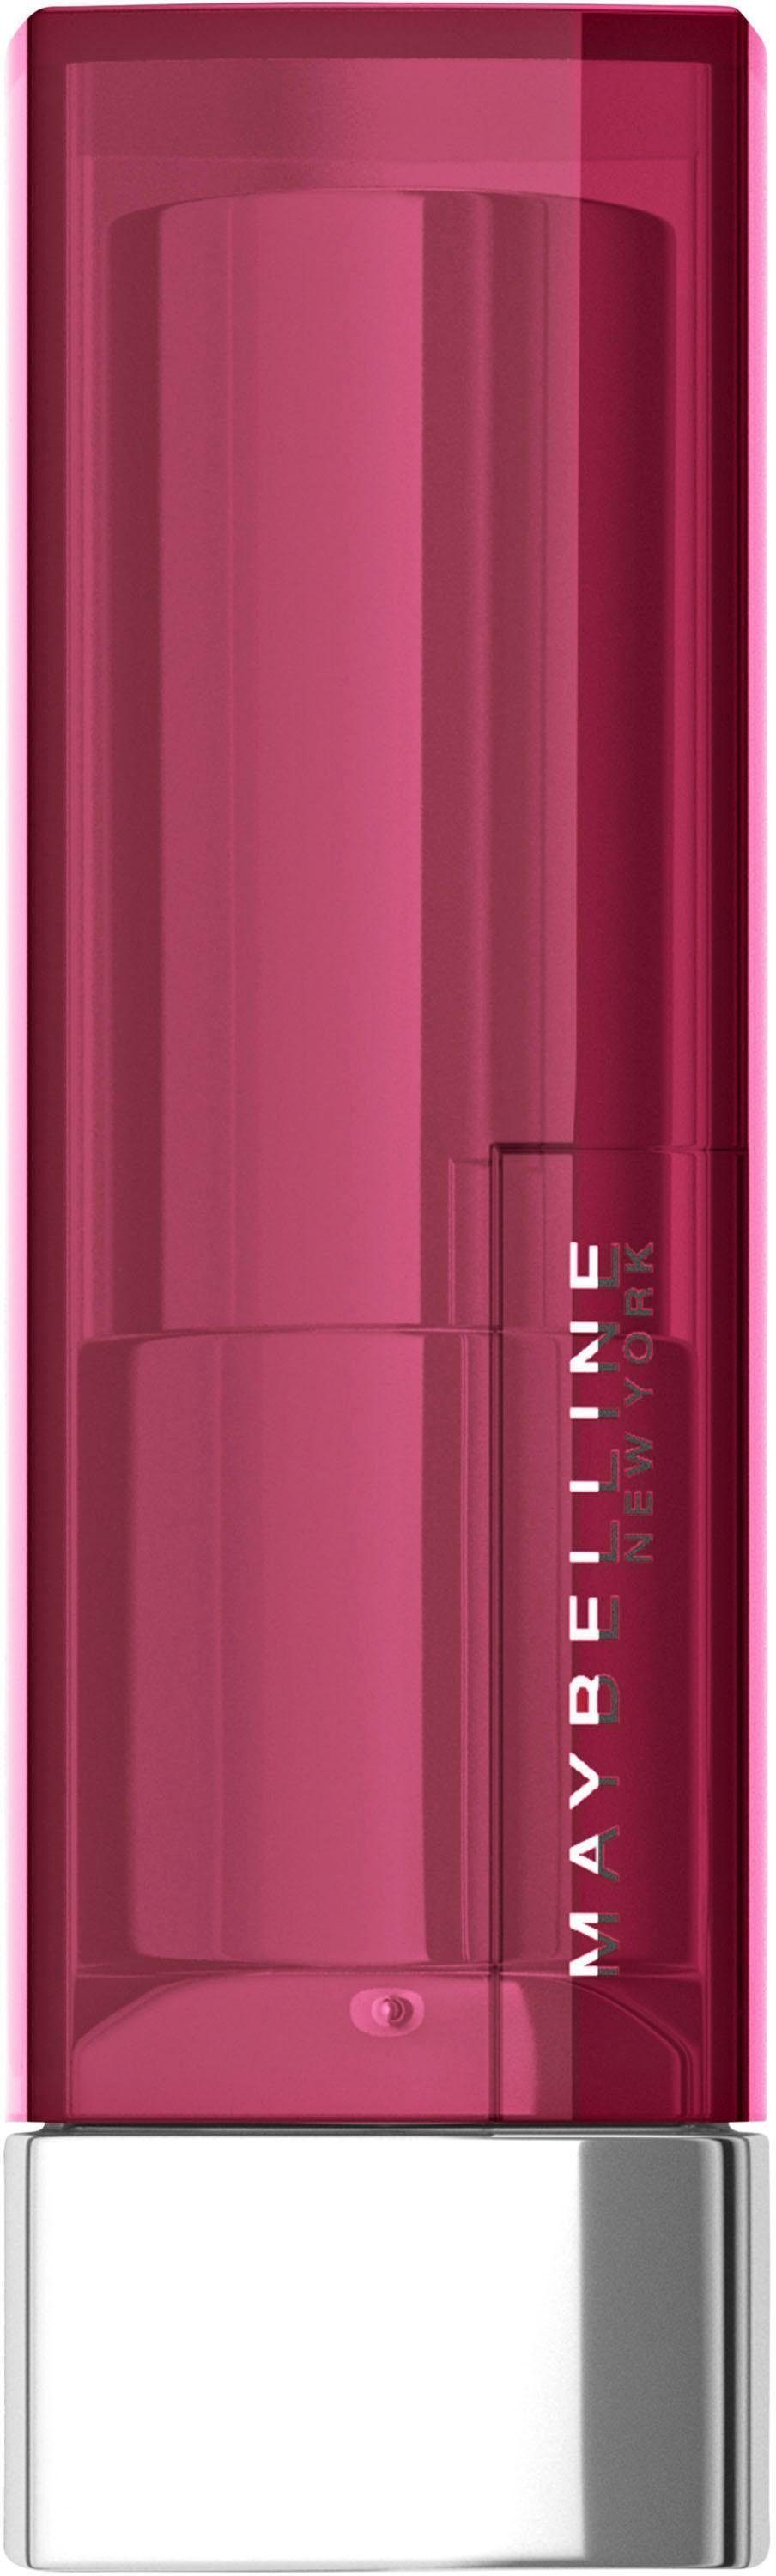 Lippenstift Thrill Pink 266 Creams Sensational the Color MAYBELLINE YORK NEW